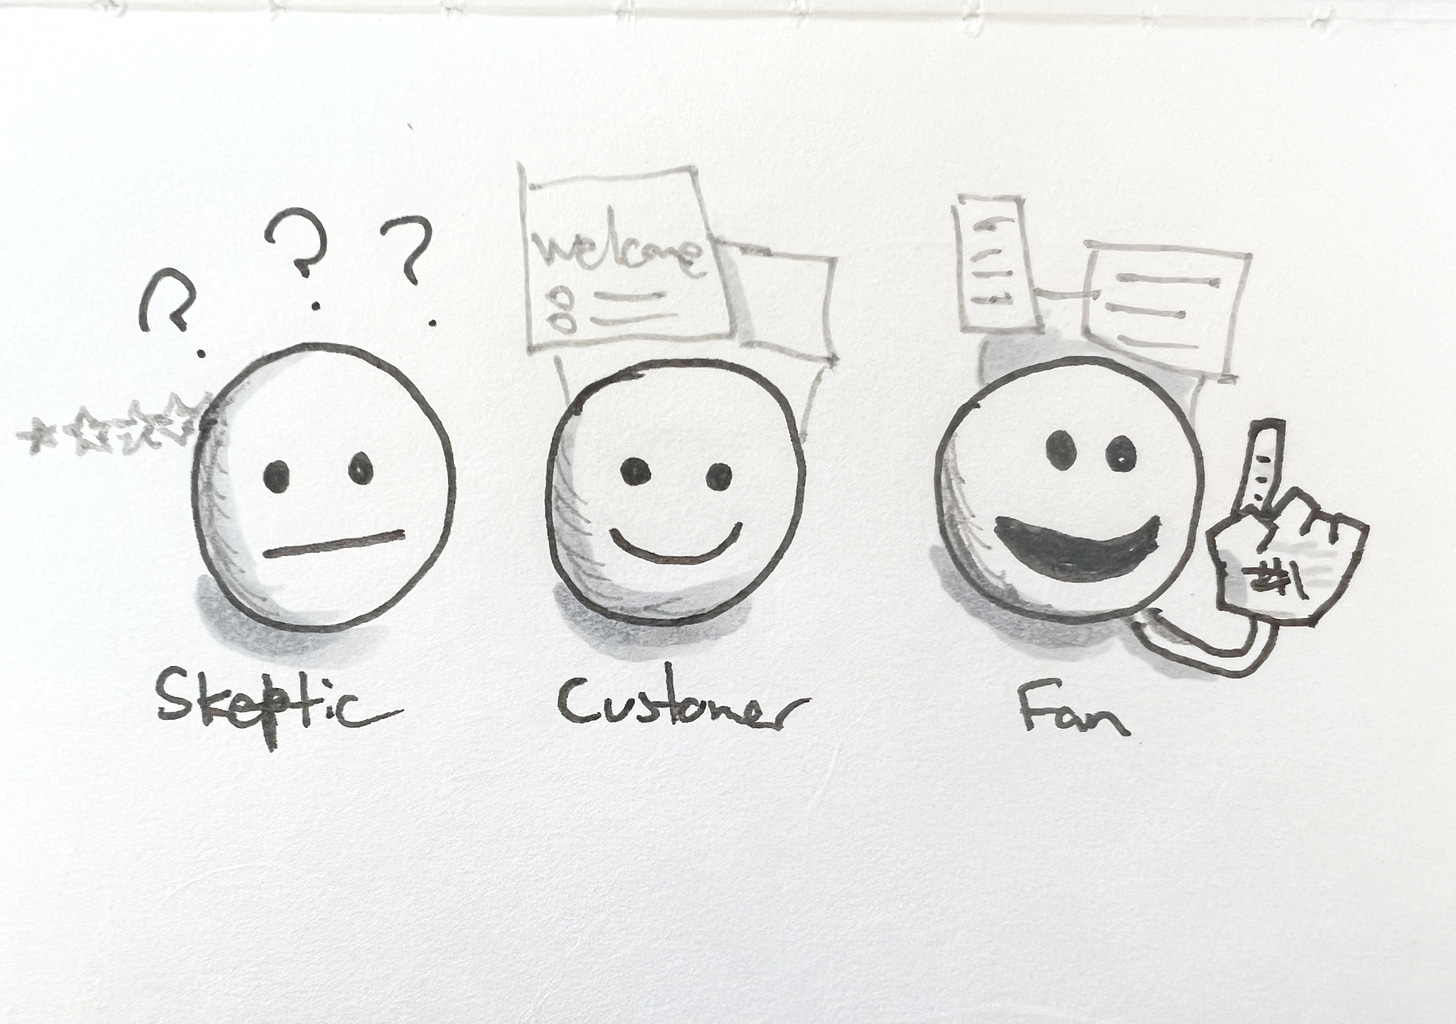 Drawing of people as circle faces depicting the cake-tic, customer and fan